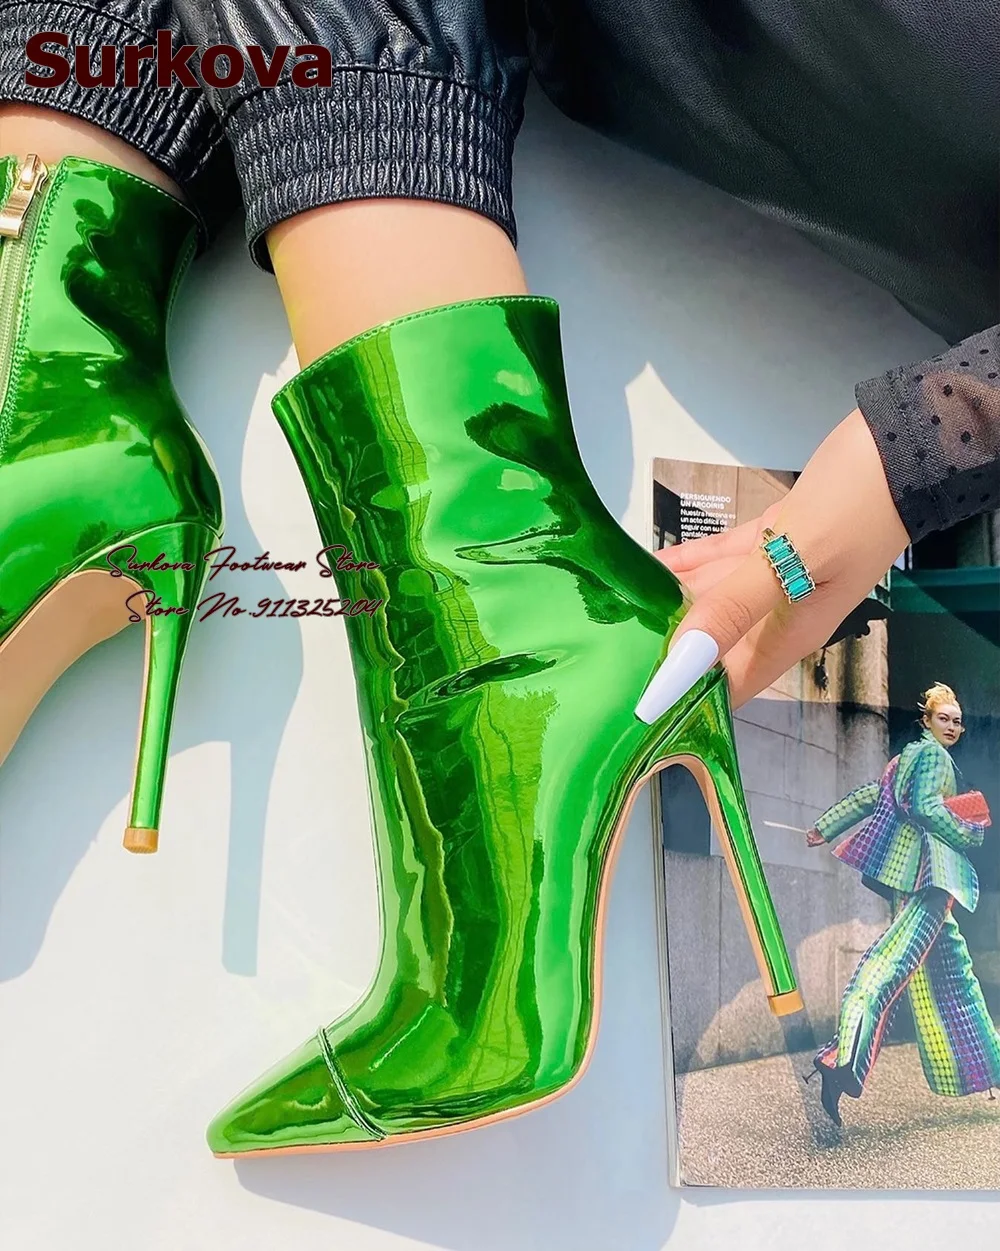 

Surkova Metallic Green Pink Patent Leather Ankle Boots Hologram Iridescent Stiletto Heel Pointed Toe Short Booties Zipped Shoes